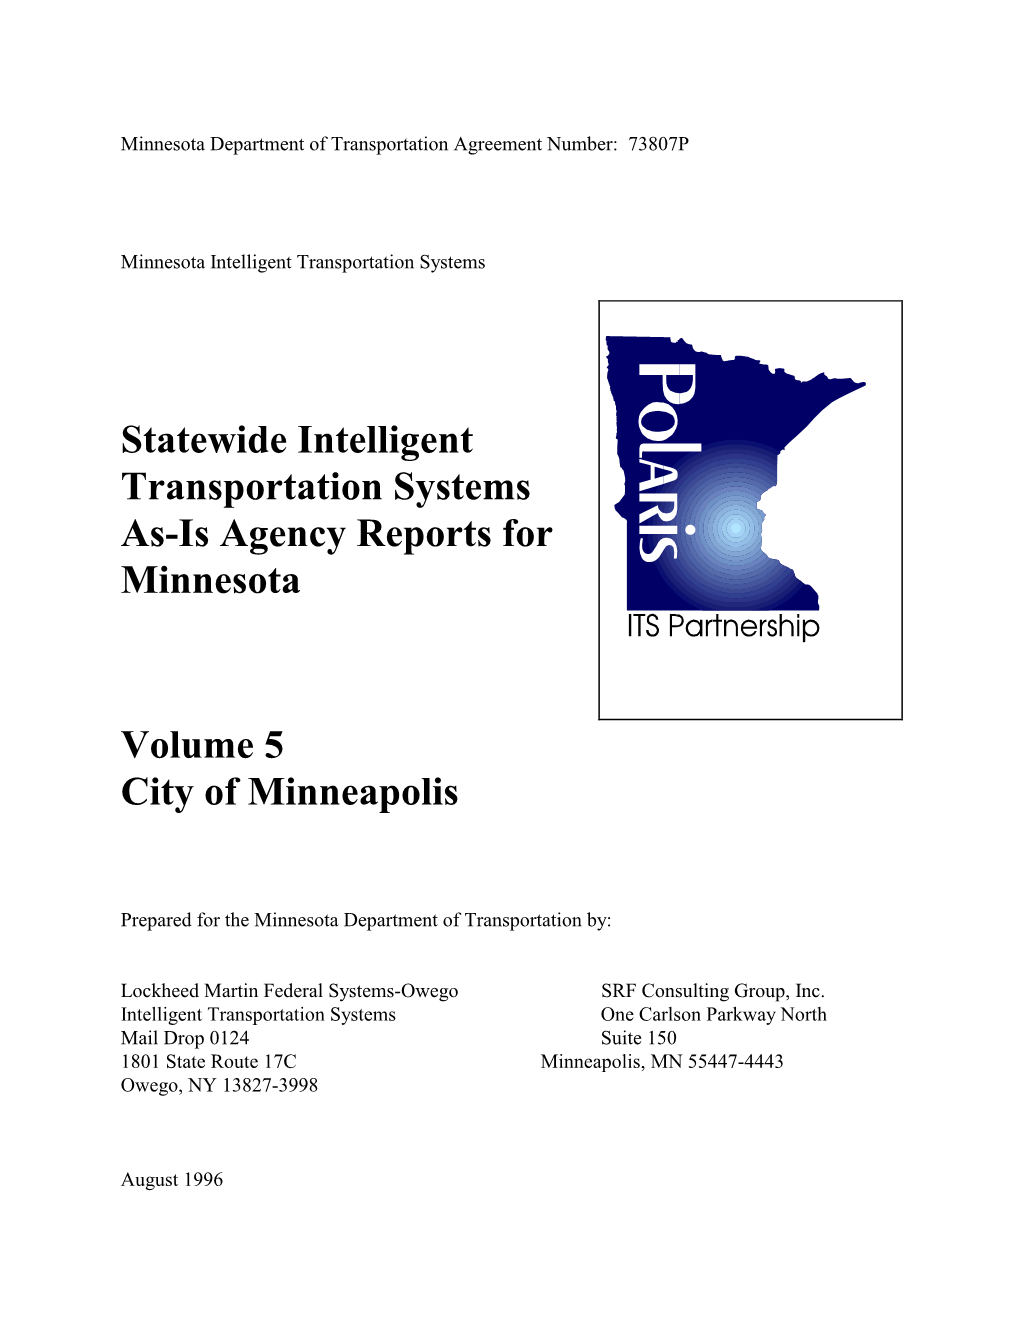 Statewide Intelligent Transportation Systems As-Is Agency Reports for Minnesota